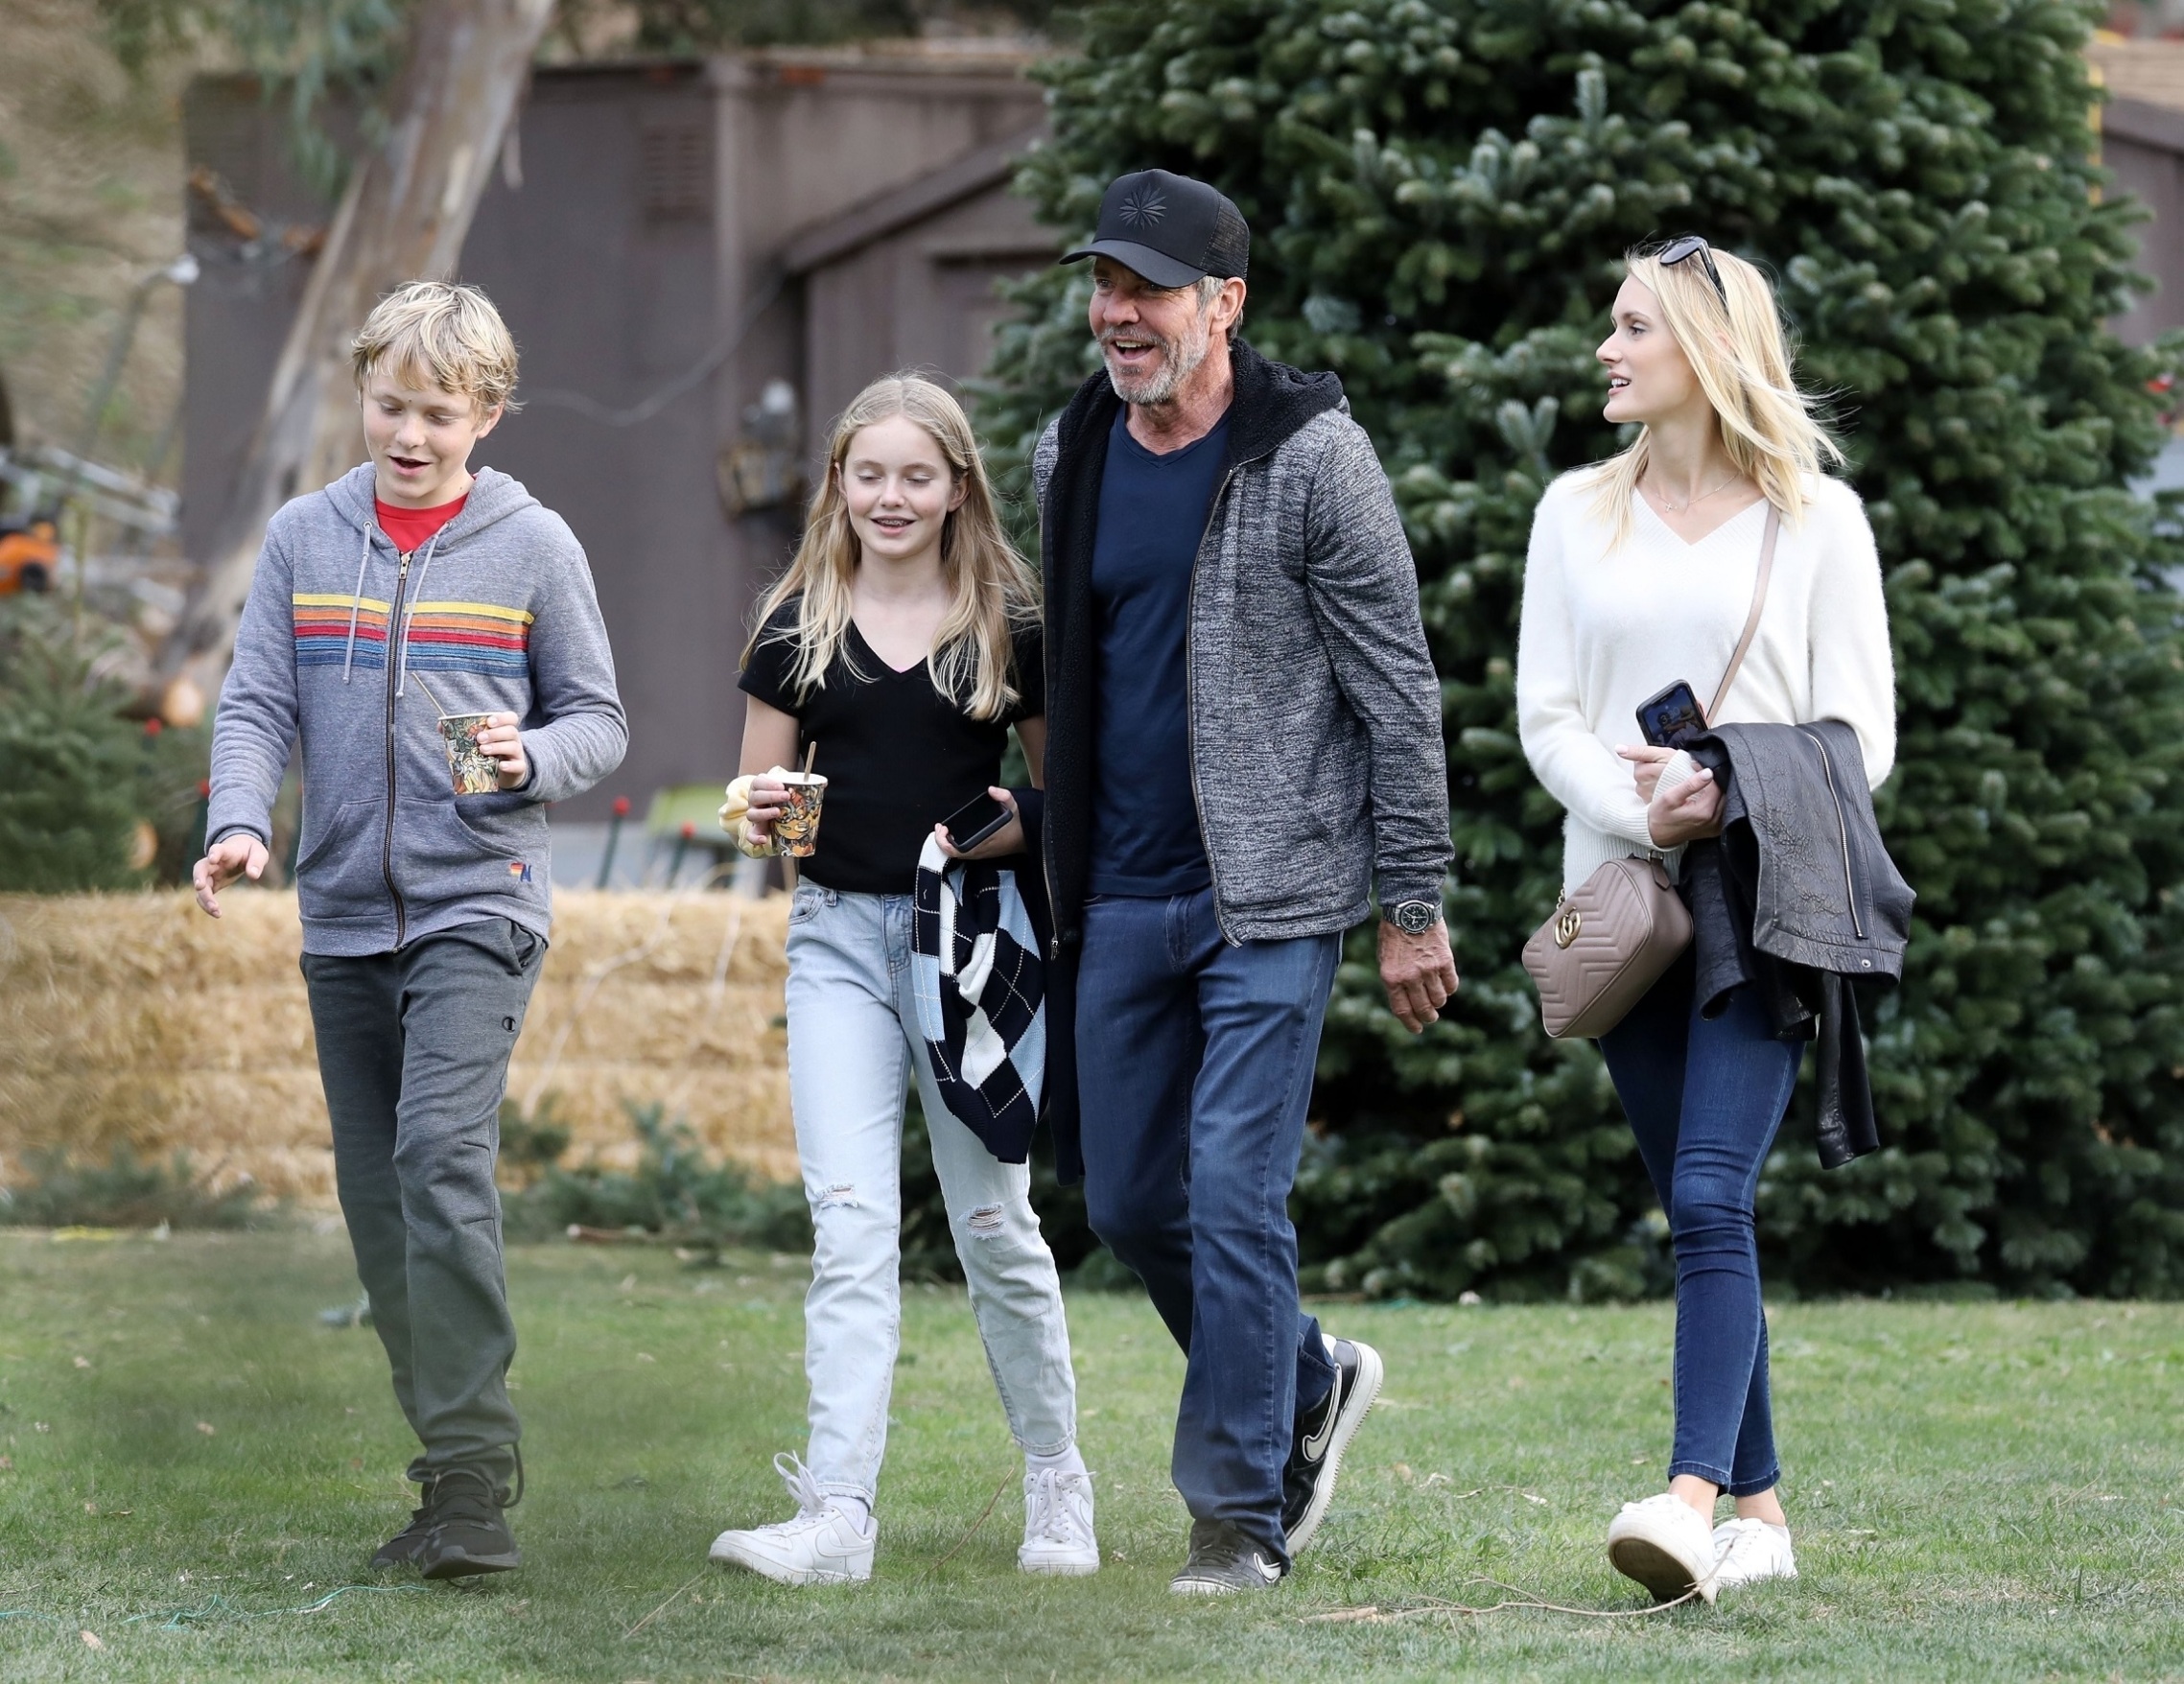 Pacific Palisades, CA  - *EXCLUSIVE*  - Dennis Quaid and his fiancée Laura Savoie go Christmas tree shopping with his two kids, Zoe and Thomas. The 'Midway' actor got into the holiday spirit, smiling and sticking his head into a snowman cutout for a photo op with his kids.

BACKGRID USA 1 DECEMBER 2019,Image: 485868582, License: Rights-managed, Restrictions: , Model Release: no, Credit line: Clint Brewer / BACKGRID / Backgrid USA / Profimedia